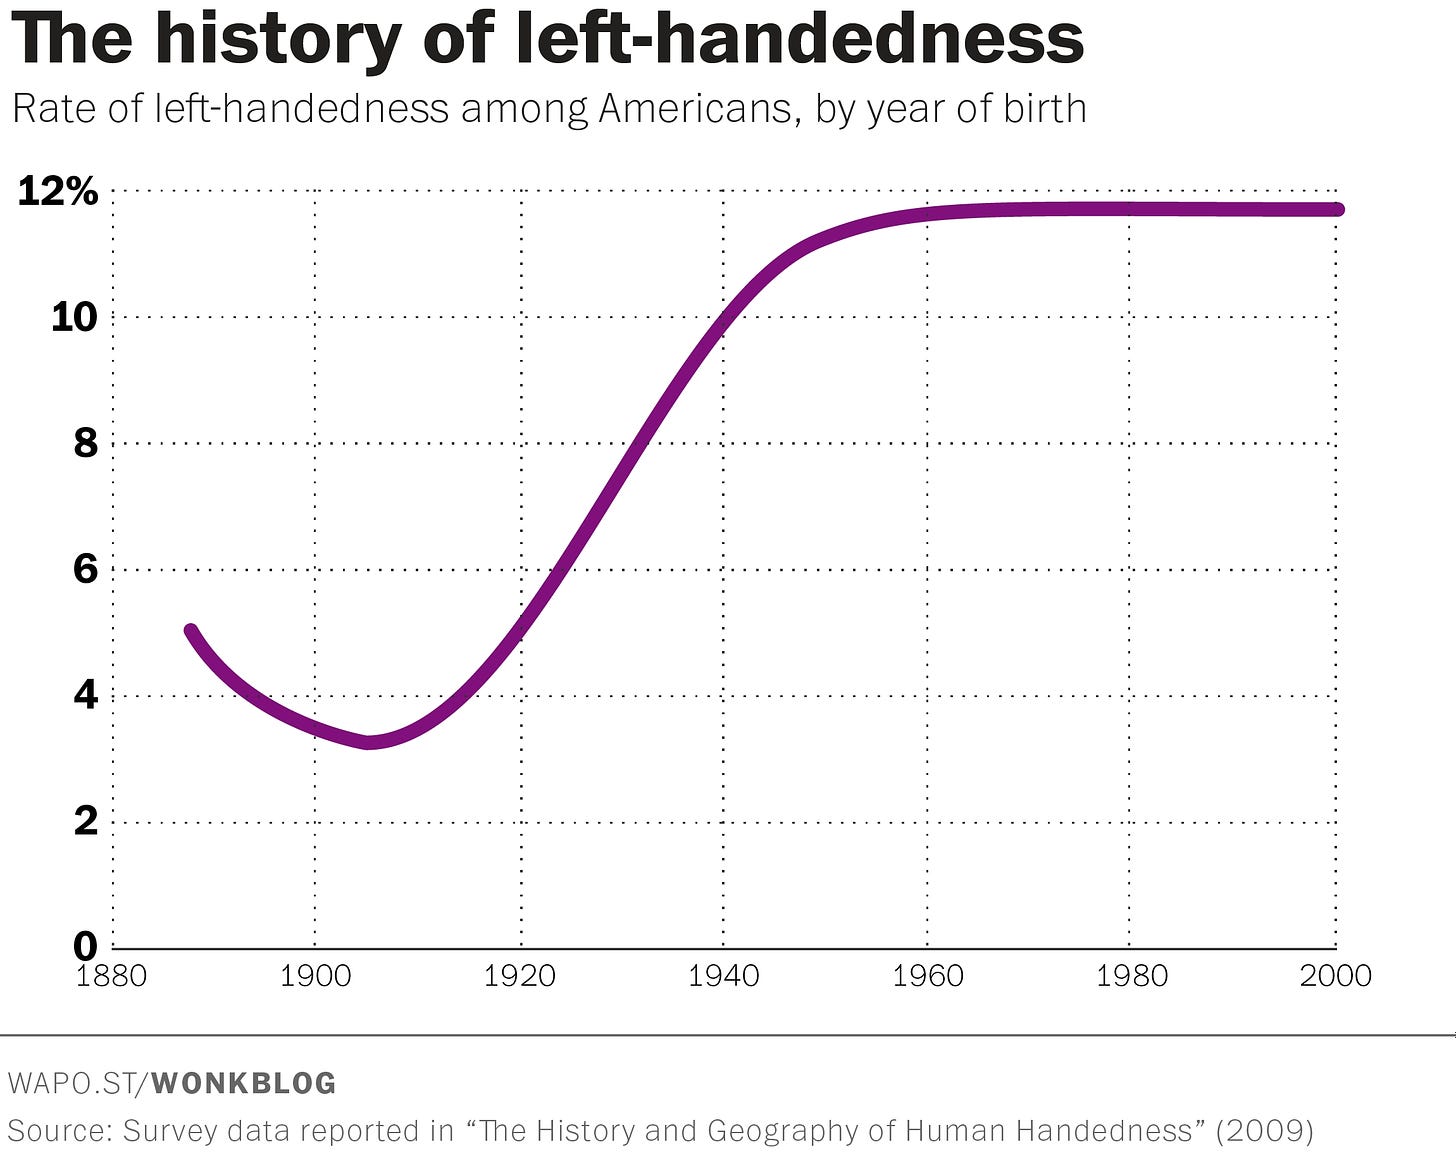 A graph showing that rates of left handedness grew exponentially after the early 1900's, to stabilize at around 12% of the total population.